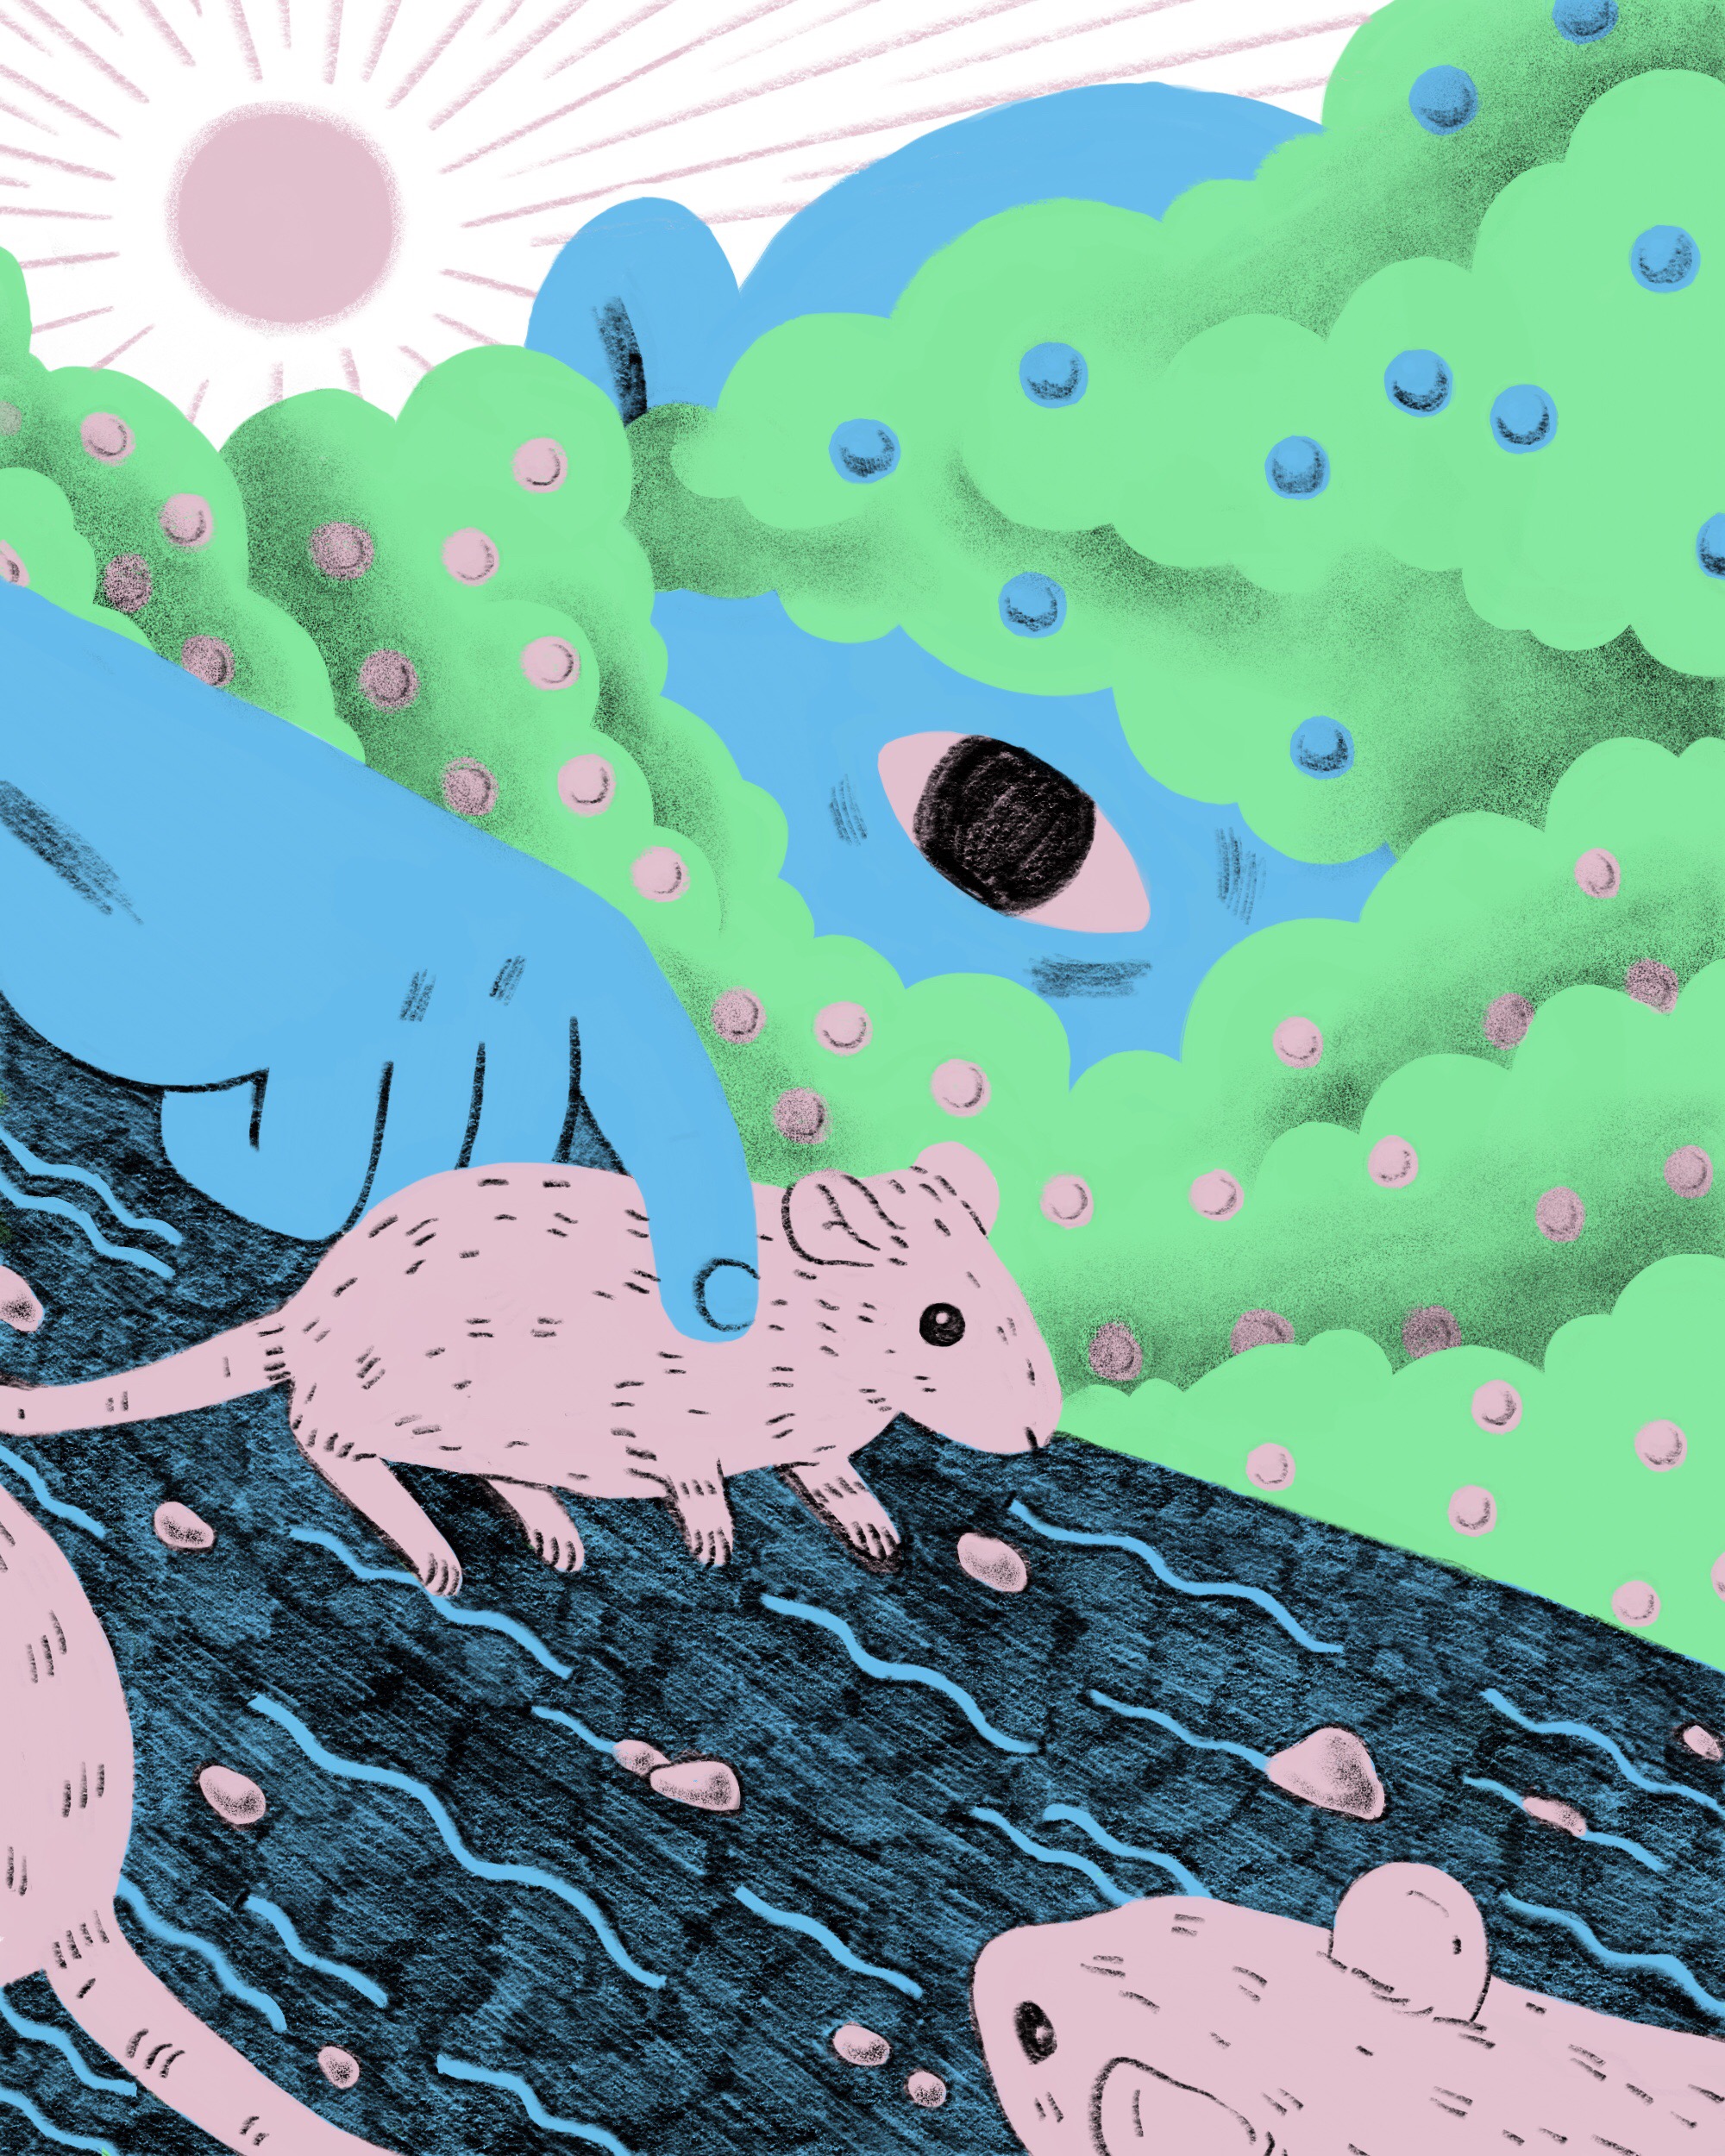 Illustration of a large blue man behind a green cloud picking up a pink mouse.